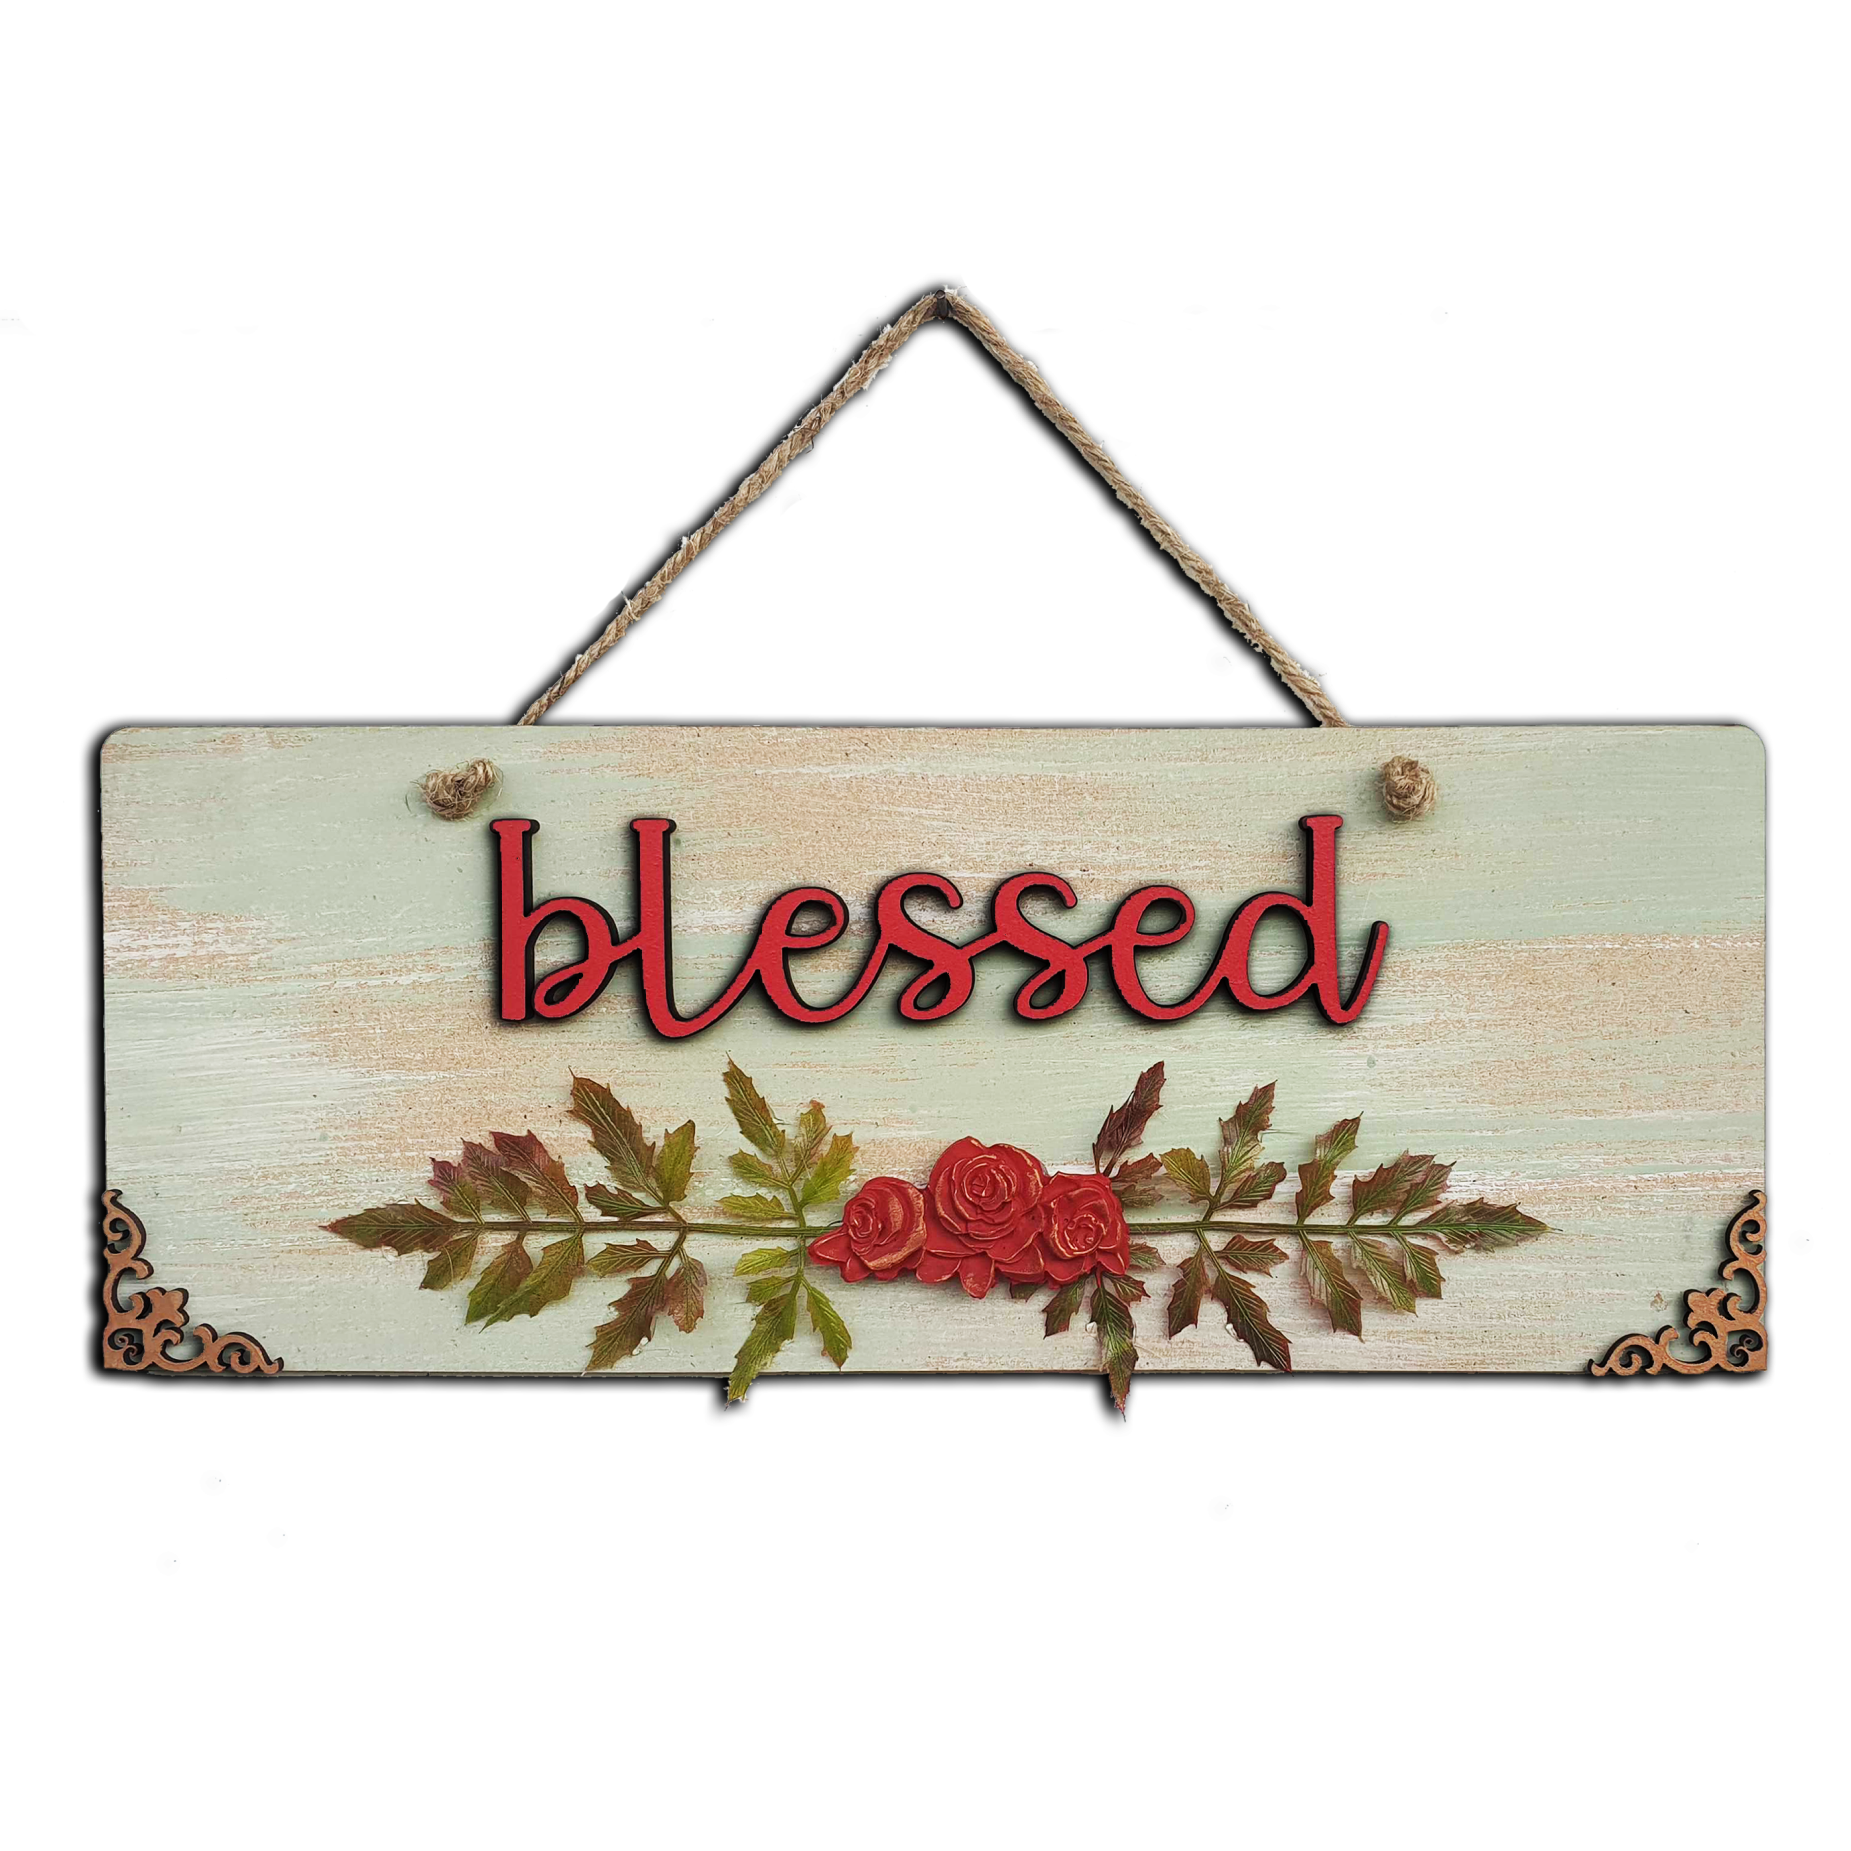 Blessed Quote Rustic Vintage Wooden Door or Wall Hanging Wemy Store